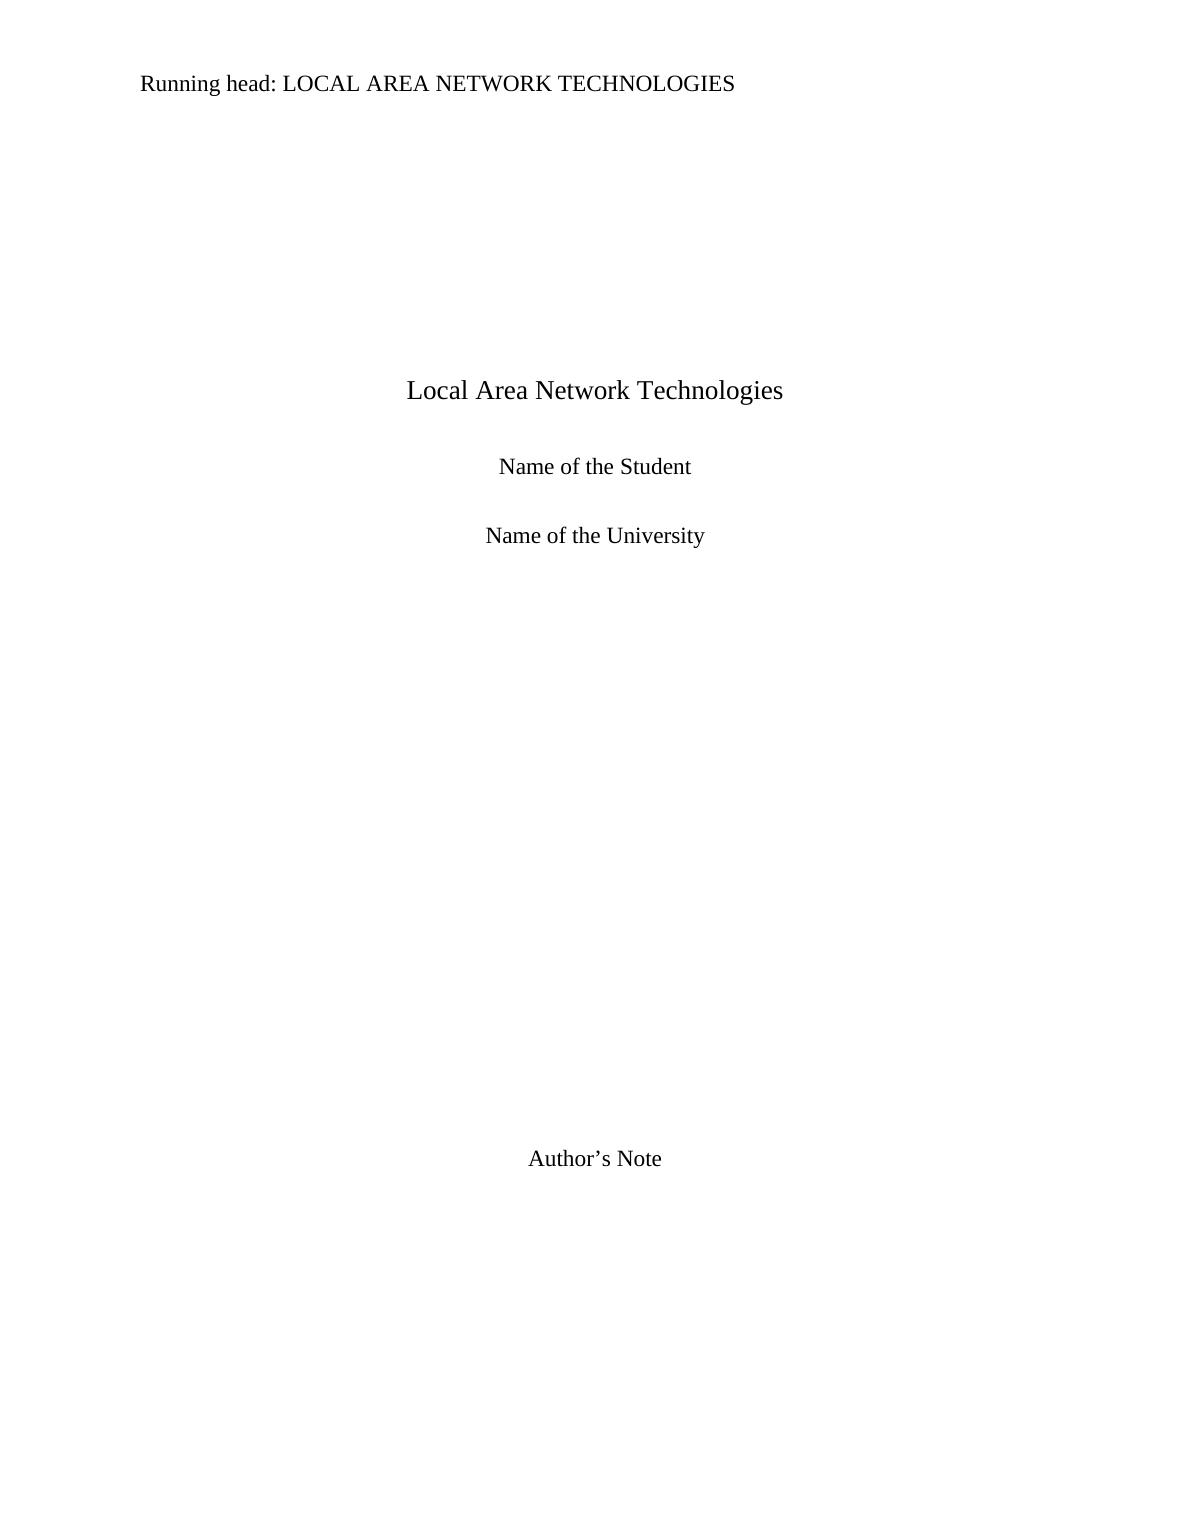 Local Area Network Technologies Assignment 2022_1